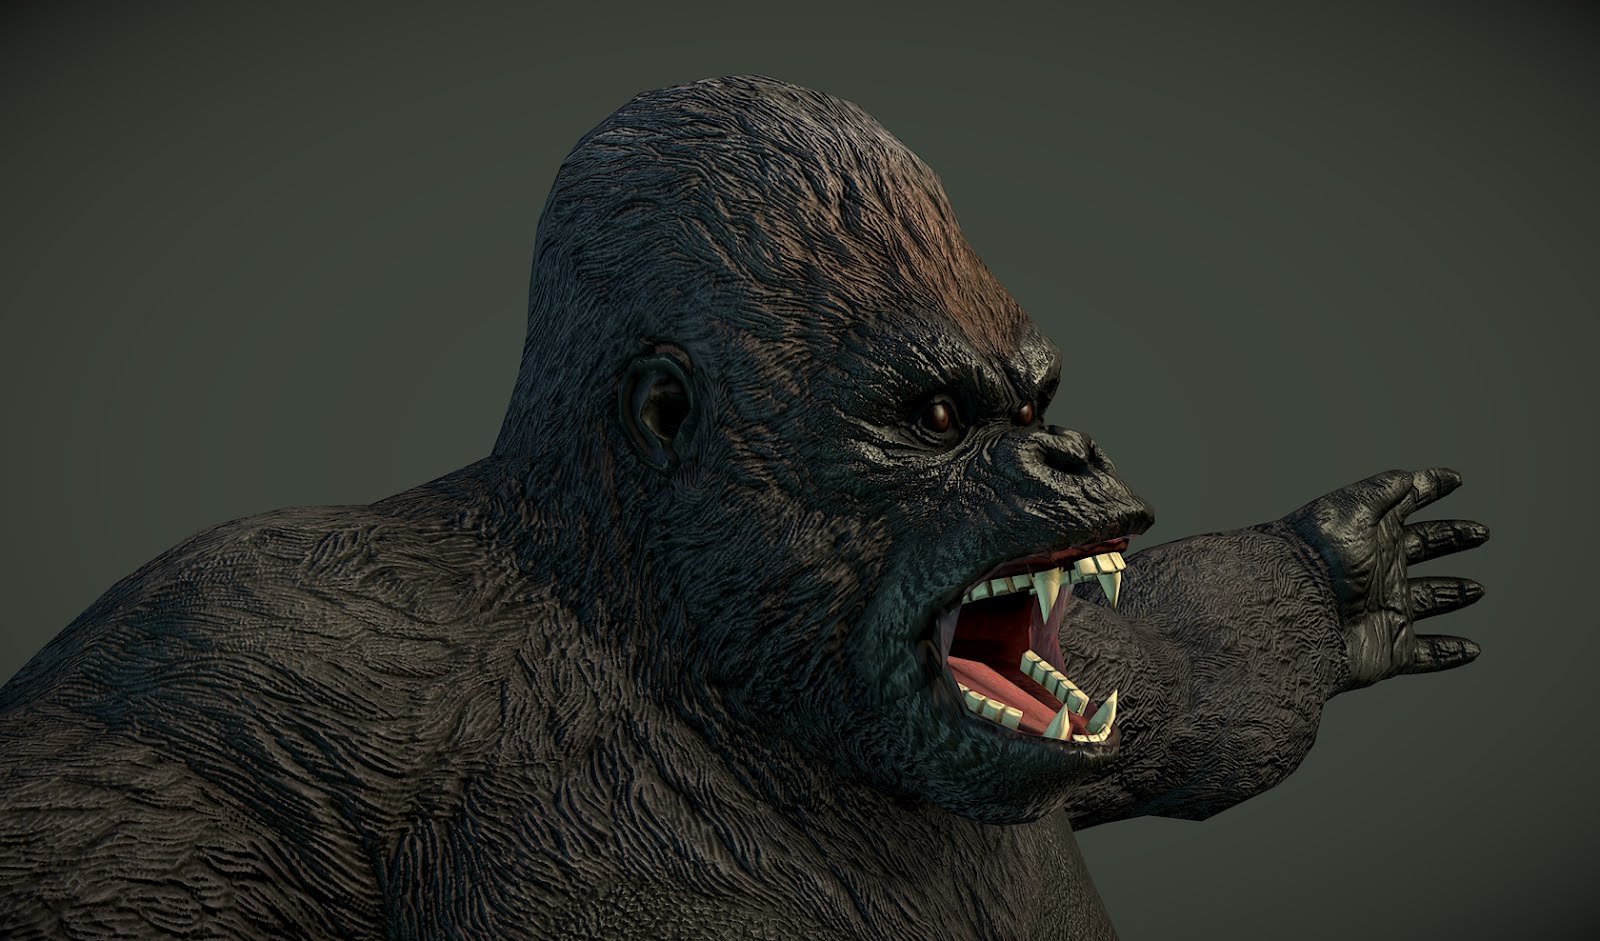 Angry_Gorilla_Mouth.jpg